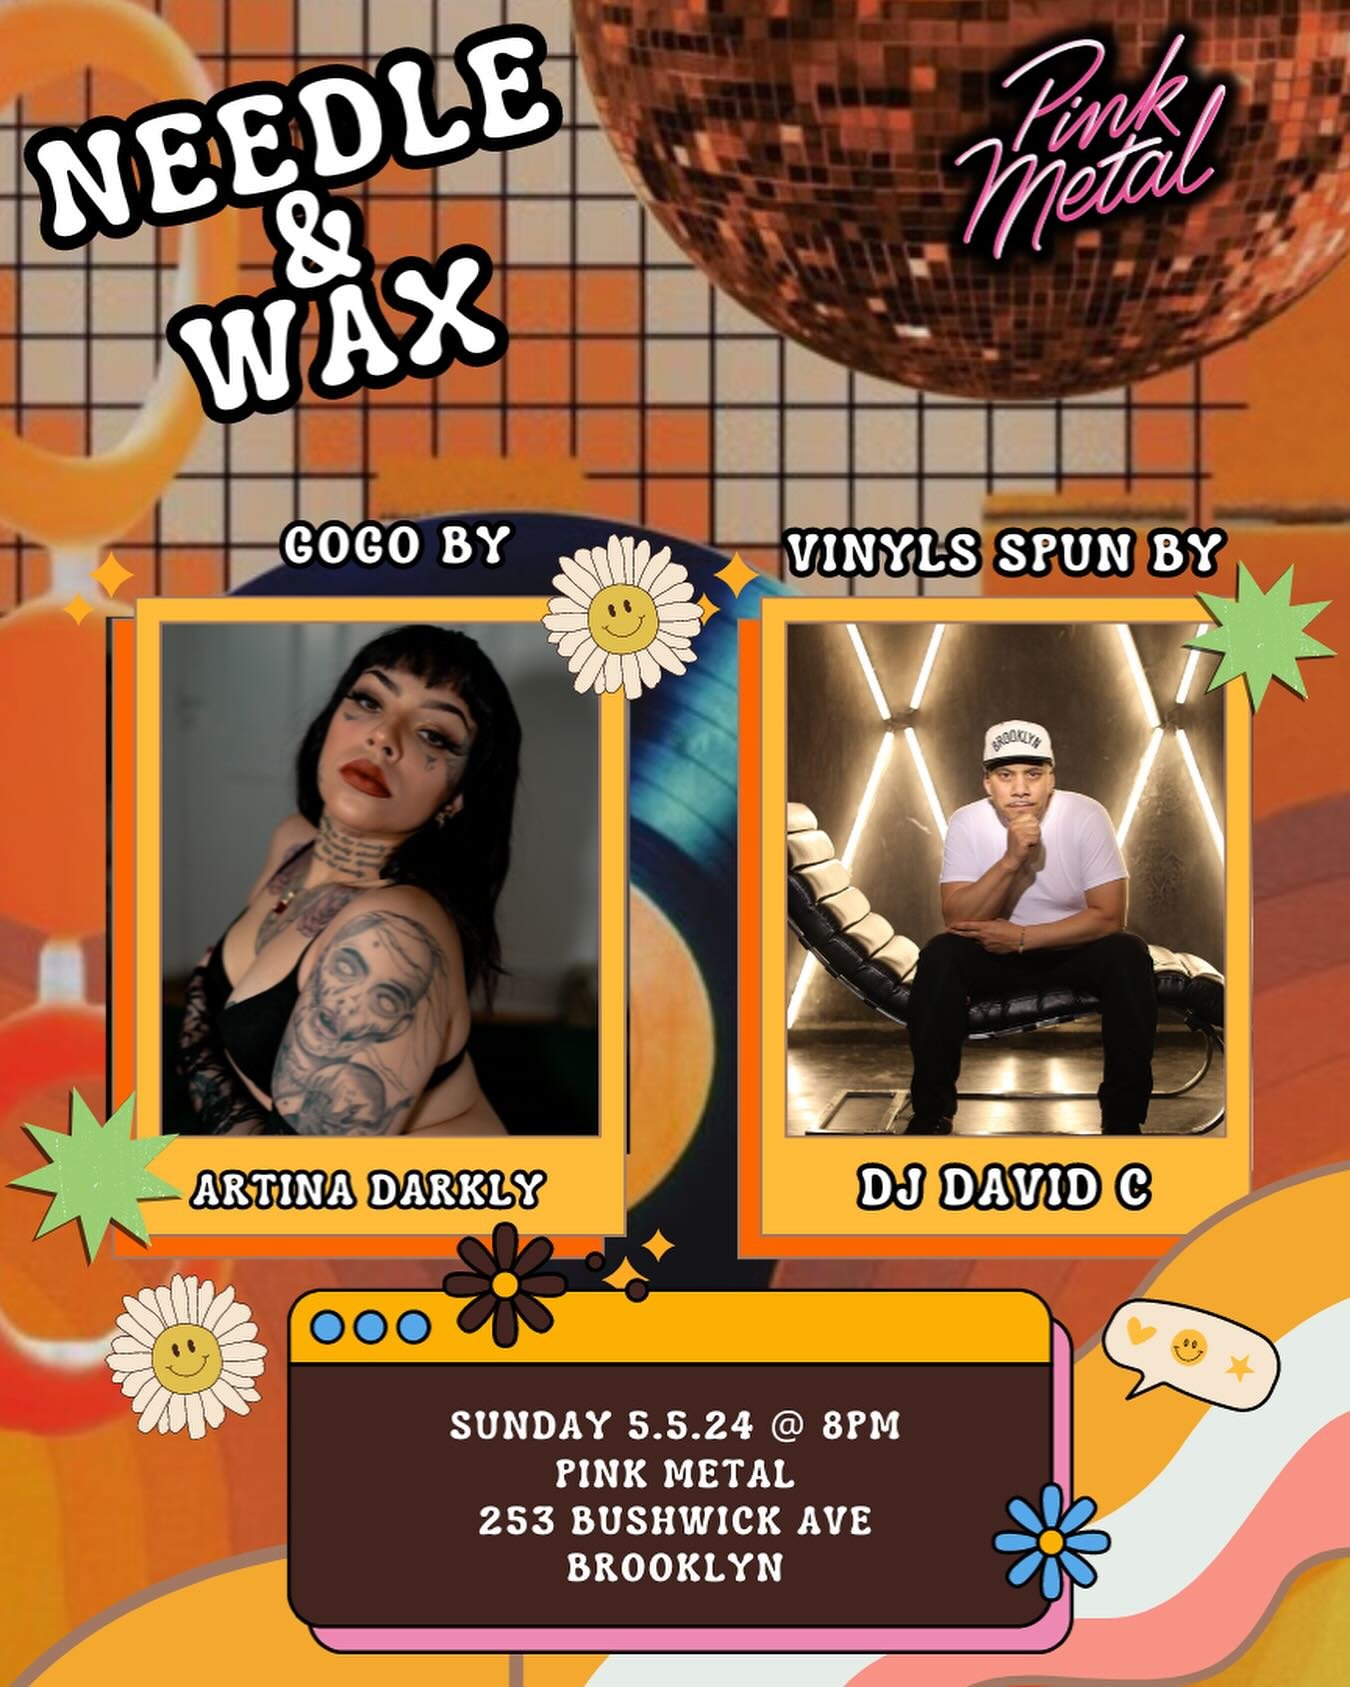 Needle &amp; Wax Cinco de Mayo edition tonight at 8 pm! Vinyls spun by @djdavidc_ 🎶 gogo by @artinadarkly 🌼 

Margaritas $8 all night! Check out our special Cinco de Mayo menu, including a mezcal old fashioned and flavored margaritas🍹 

@lostshoes